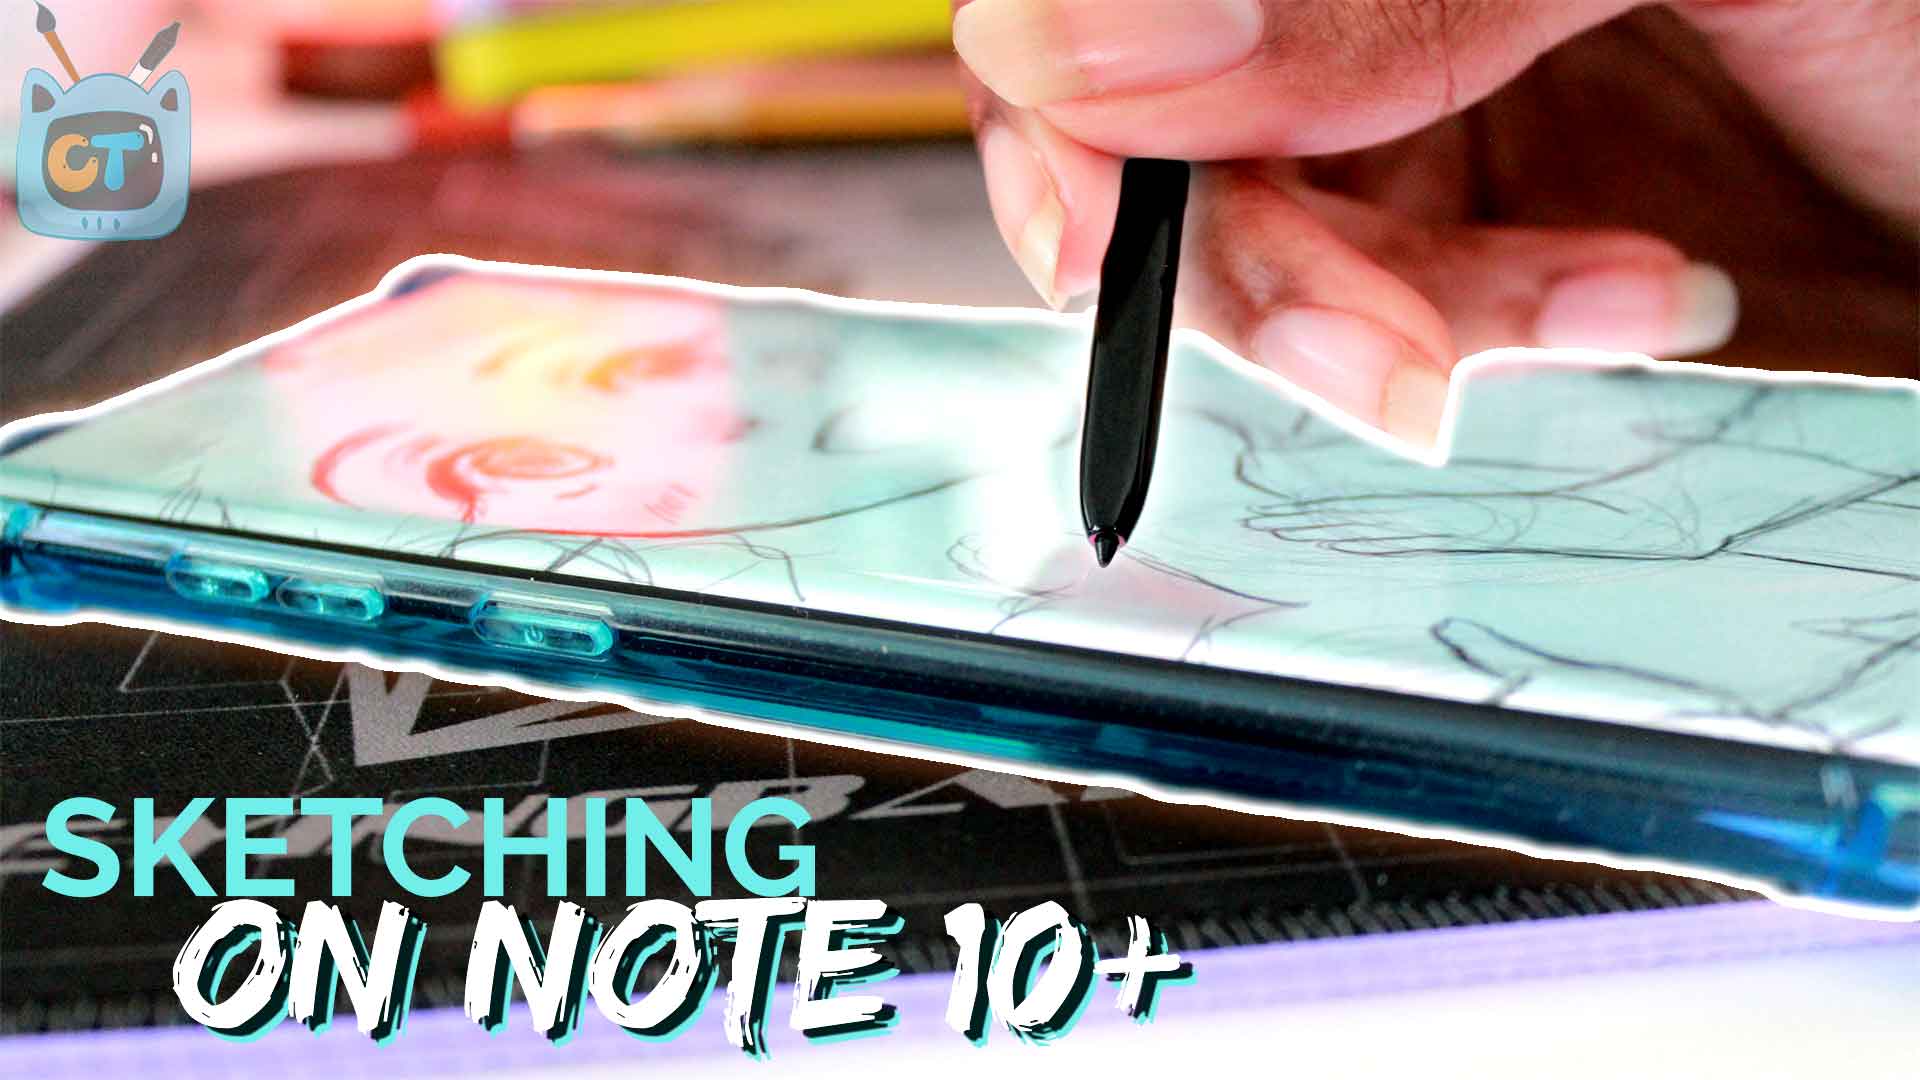 Drawing on the Samsung Galaxy Note 10 plus! Artist Initial Impressions